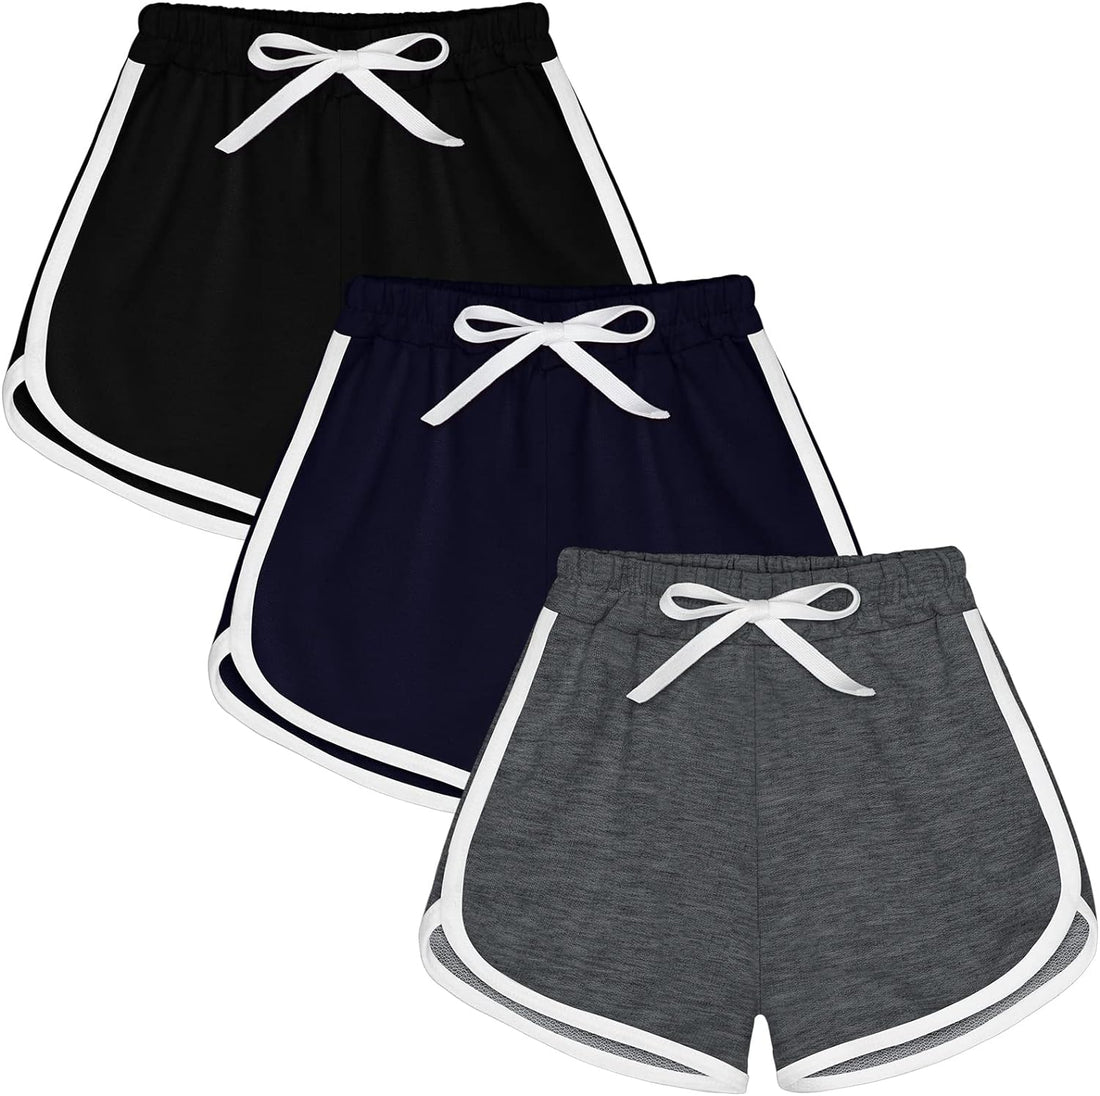 3 Pieces Girls Boys Running Athletic Shorts Dance Sport Shorts Summer Workout Shorts for Toddler Kids